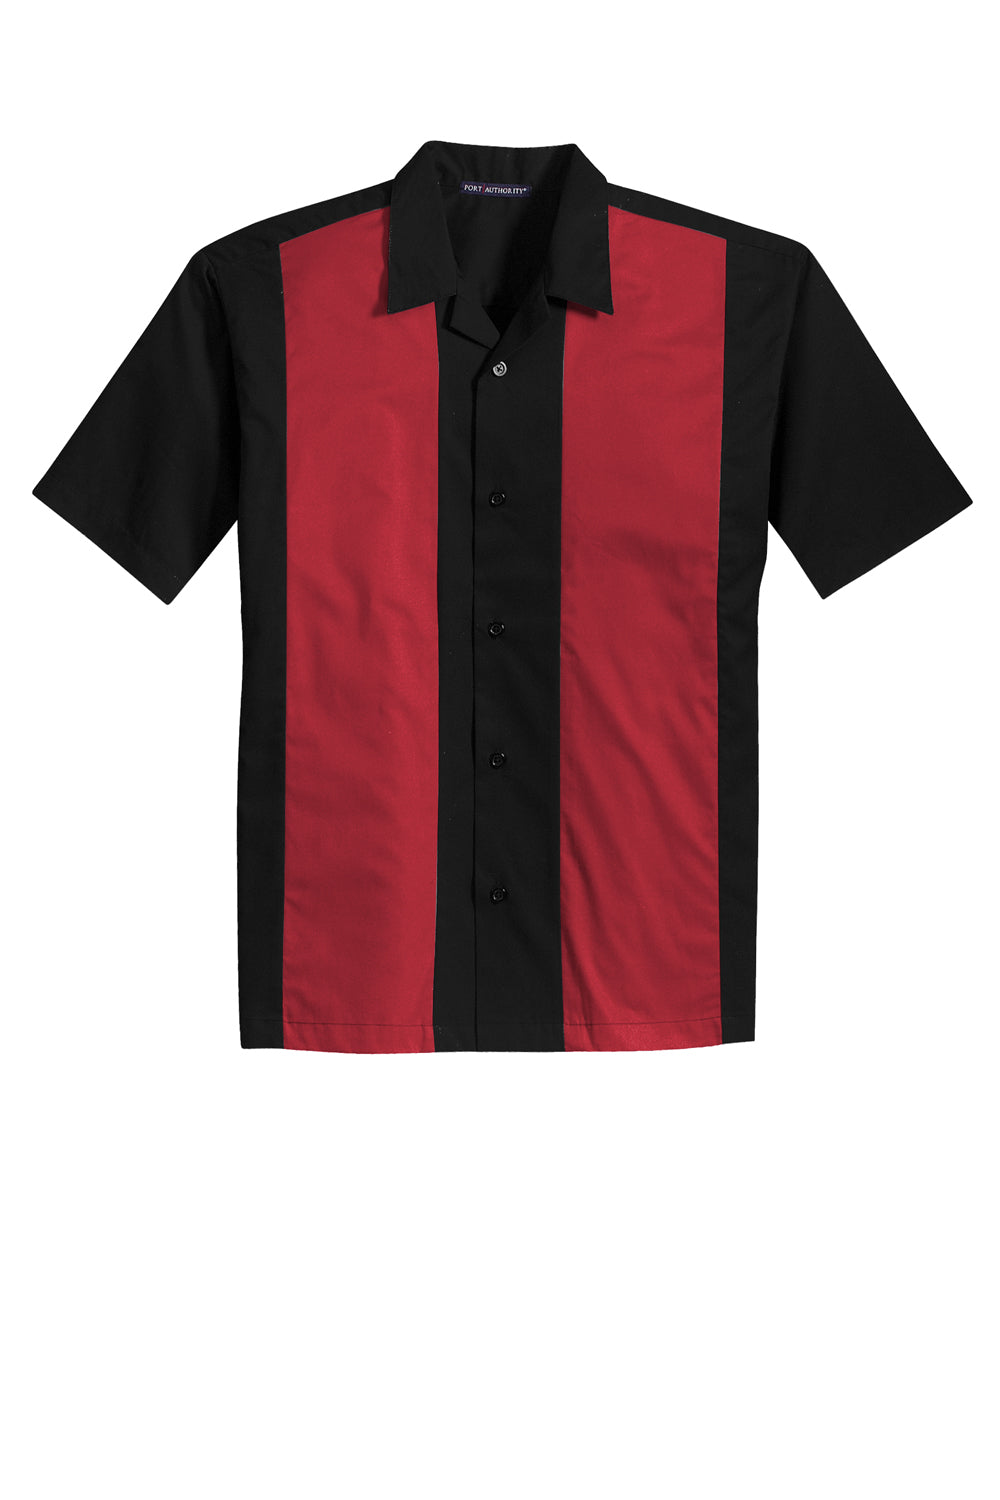 Port Authority S300 Retro Easy Care Wrinkle Resistant Short Sleeve Button Down Camp Shirt Black/Red Flat Front